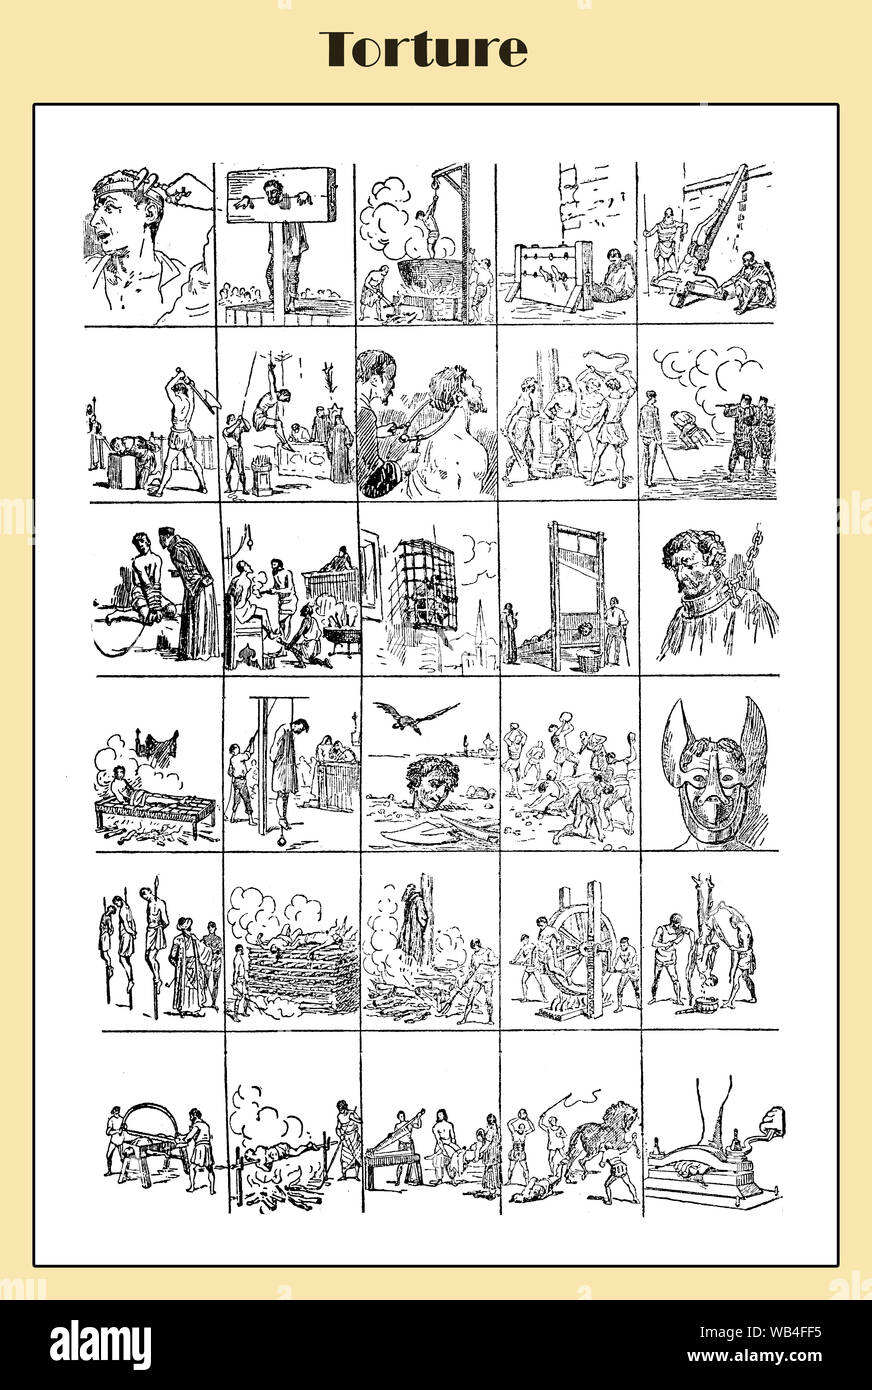 Torture and its brutality illustration from an Italian lexicon Stock Photo